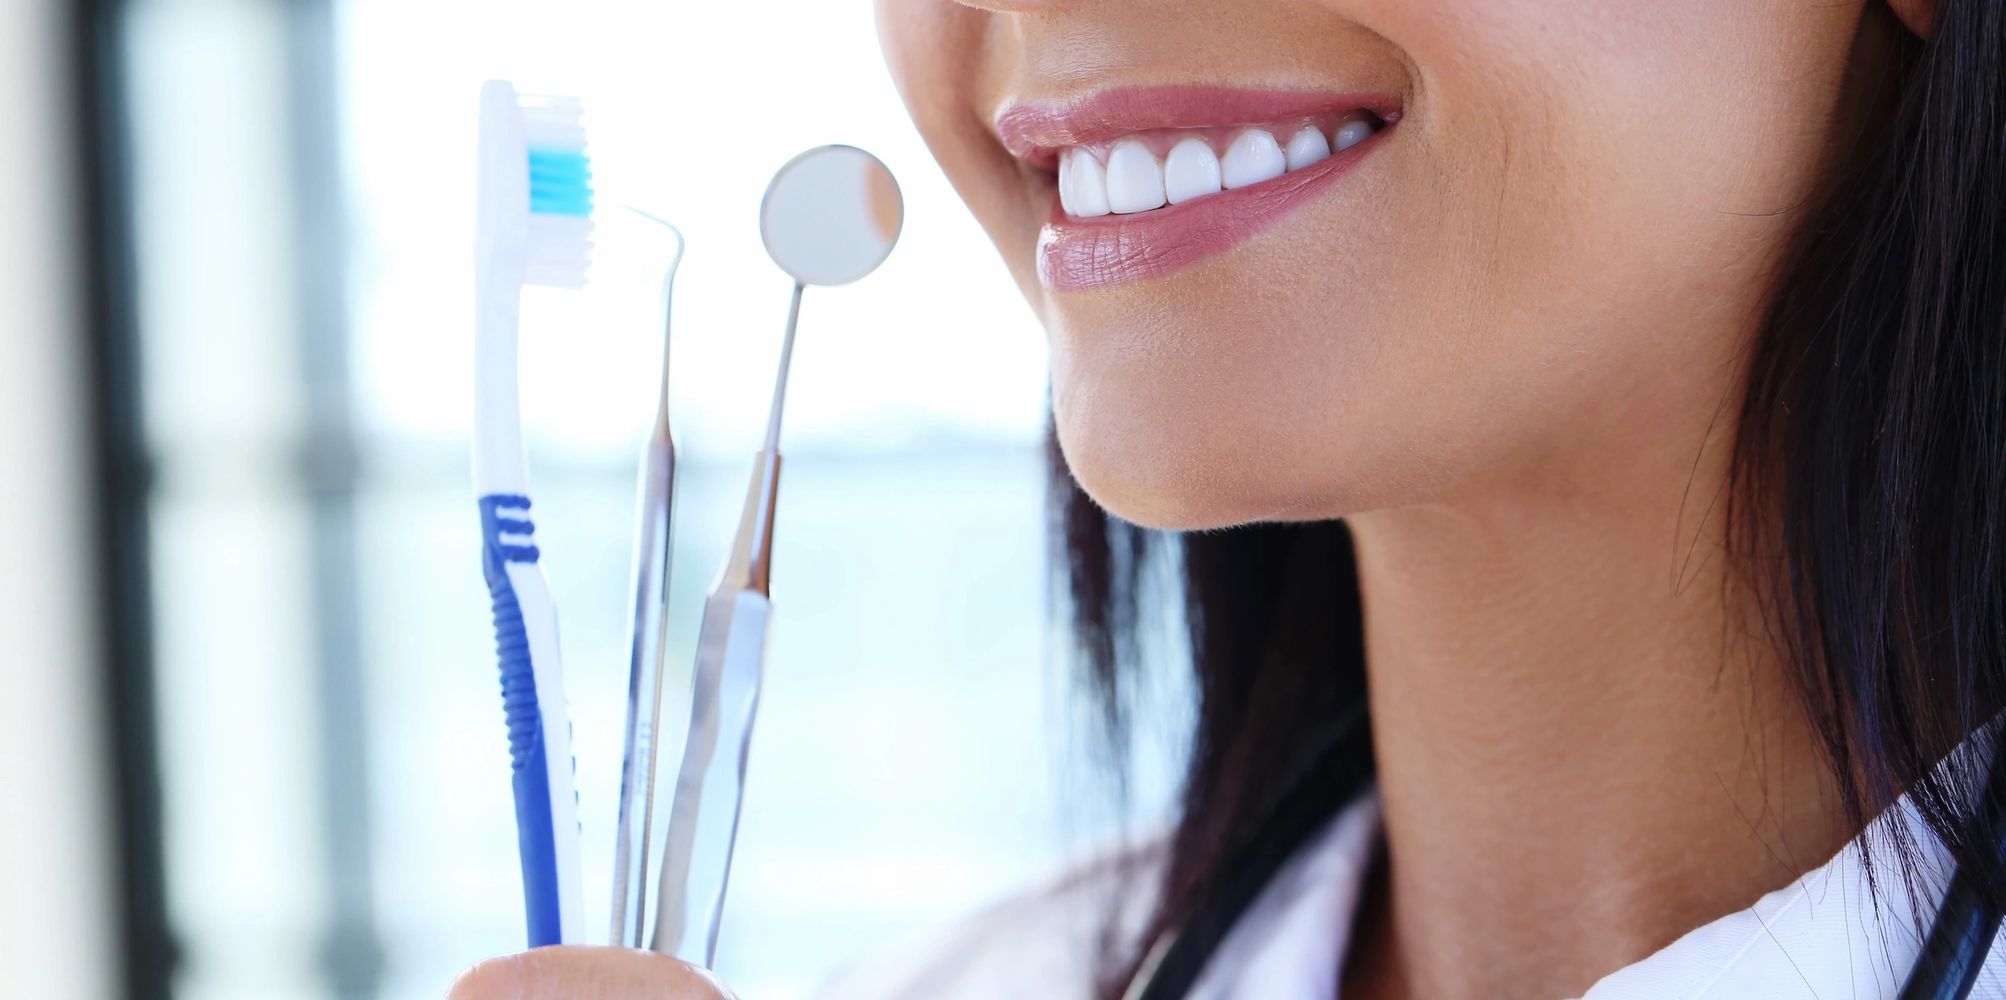 Experience painless dental care in Grand Blanc, MI with our skilled and compassionate team.